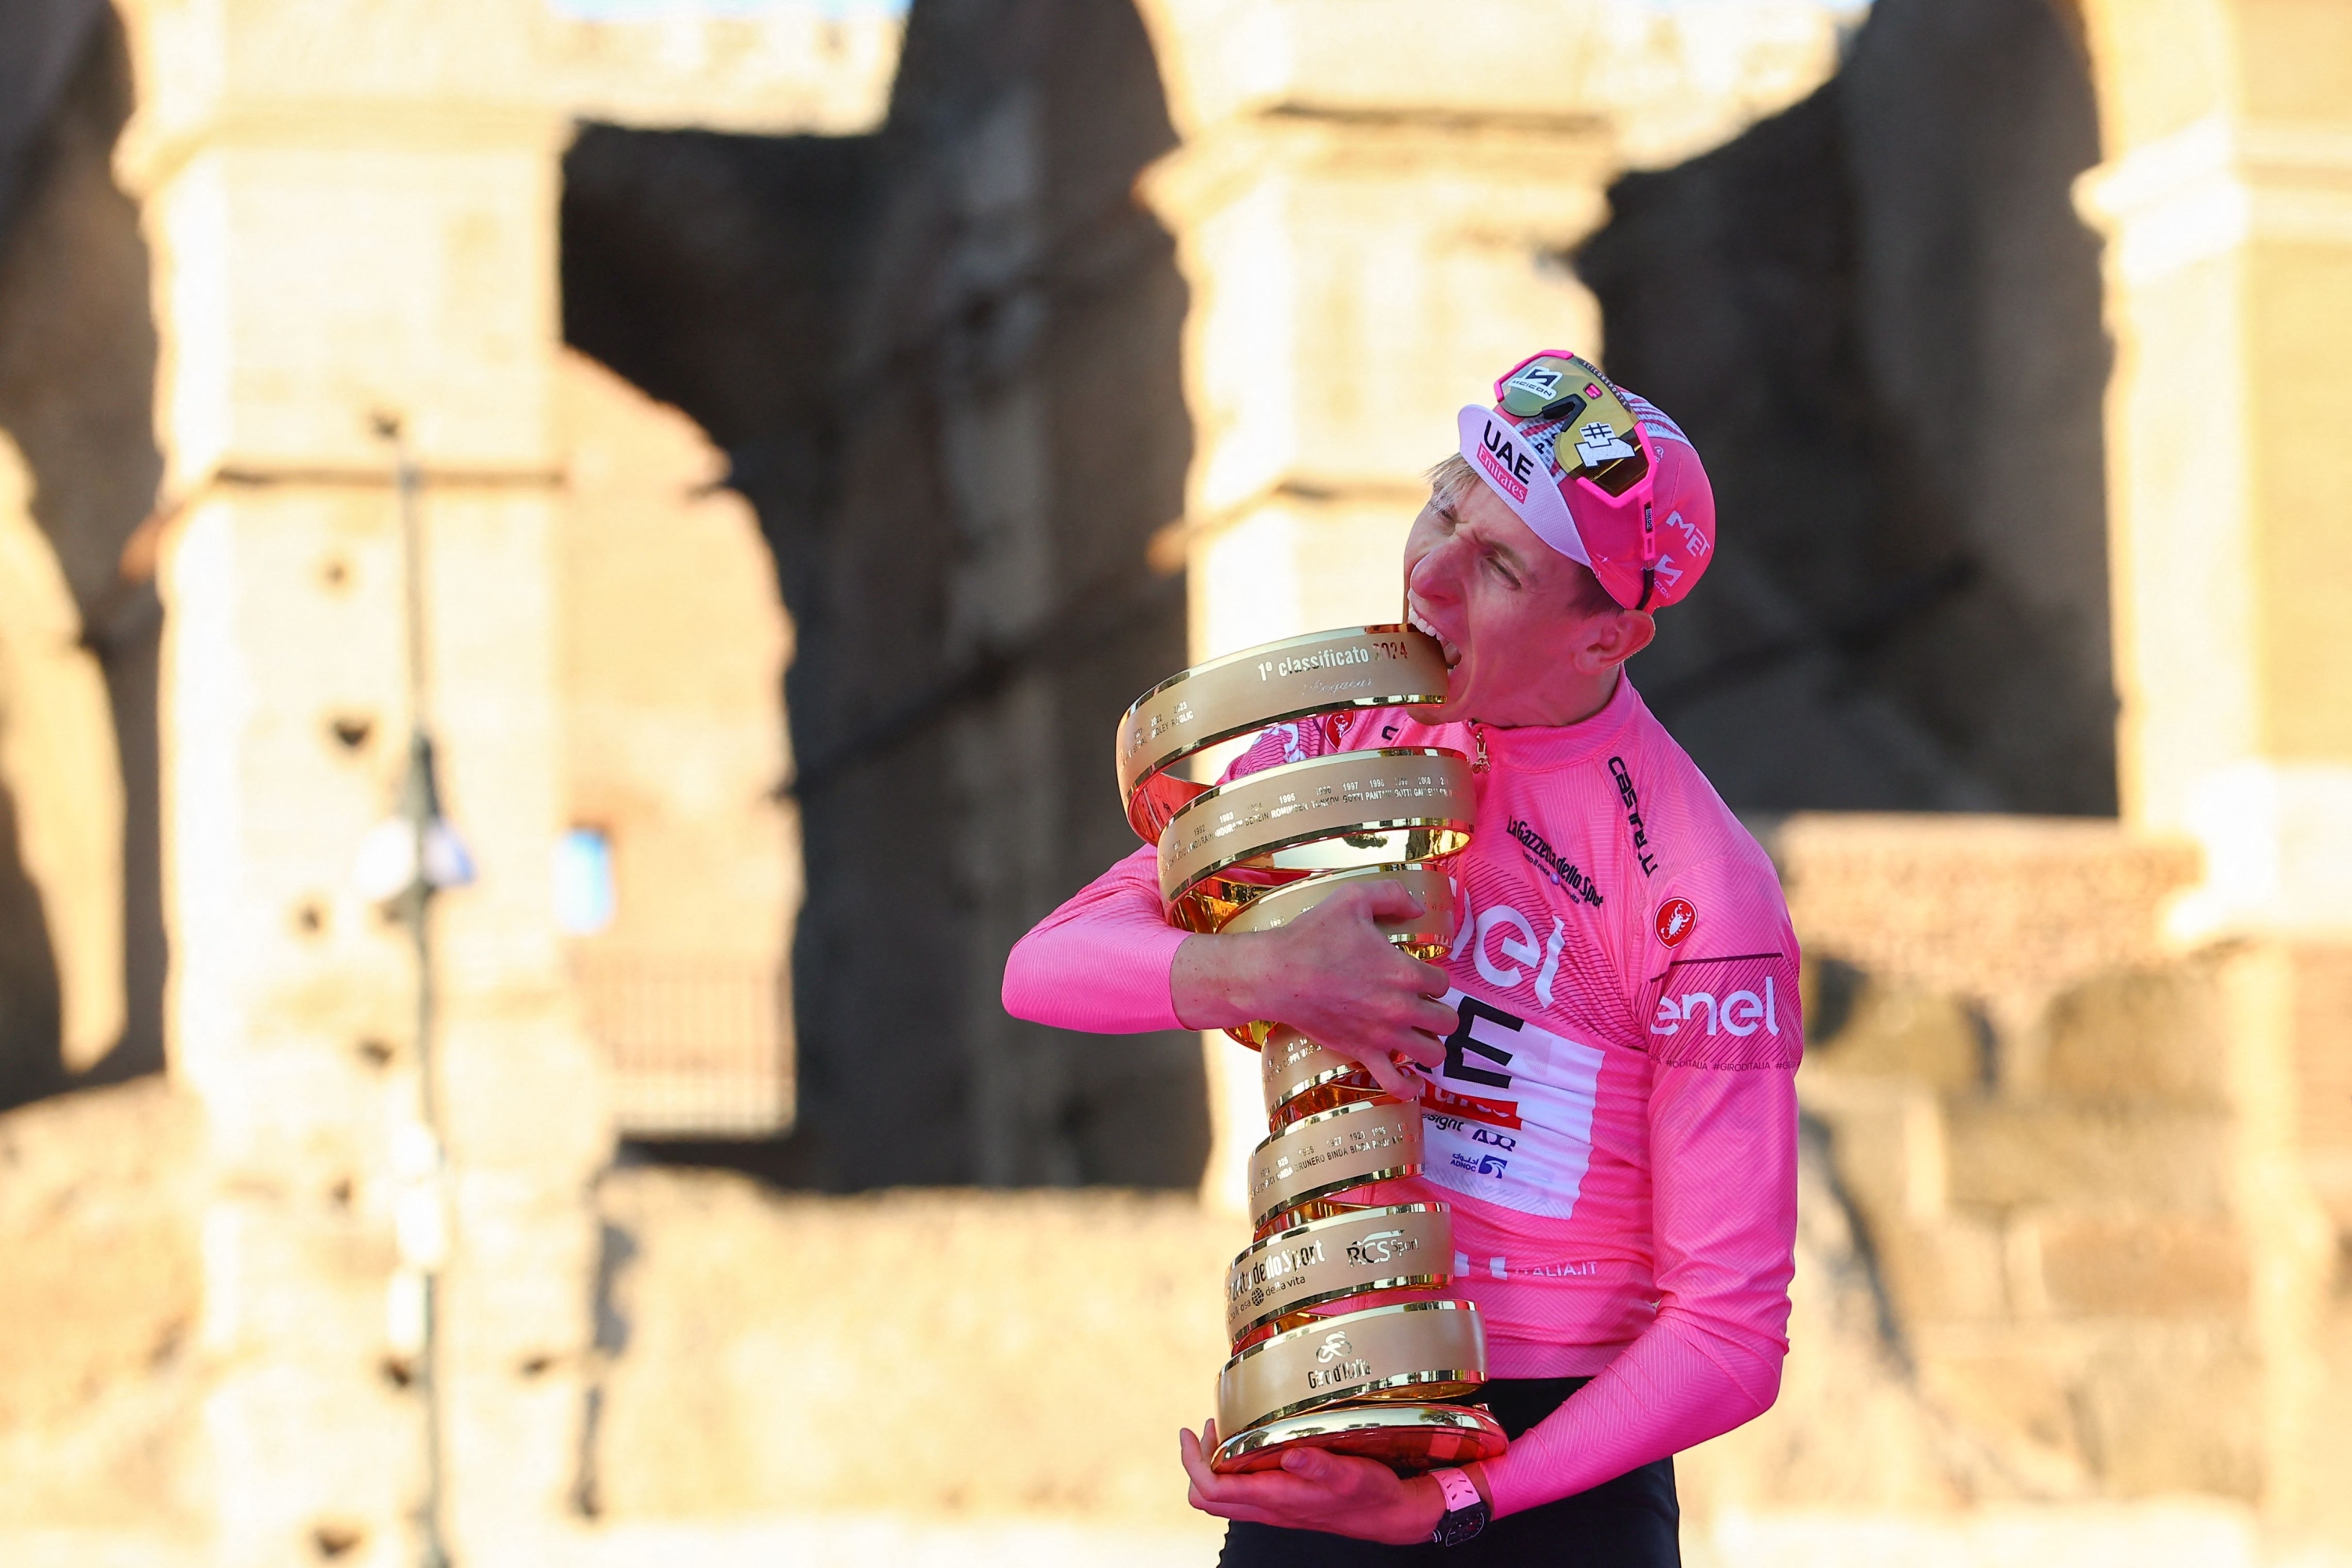 TOPSHOT - Team UAE's Slovenian rider Tadej Pogacar celebrates his overall leader's pink jersey with the "Trofeo Senza Fine" (Endless or Infinity Trophy) on the podium in front of the Colosseum, after the 21st and last stage of the 107th Giro d'Italia cycling race, 125km from Rome to Rome on May 26, 2024. (Photo by Luca Bettini / AFP)